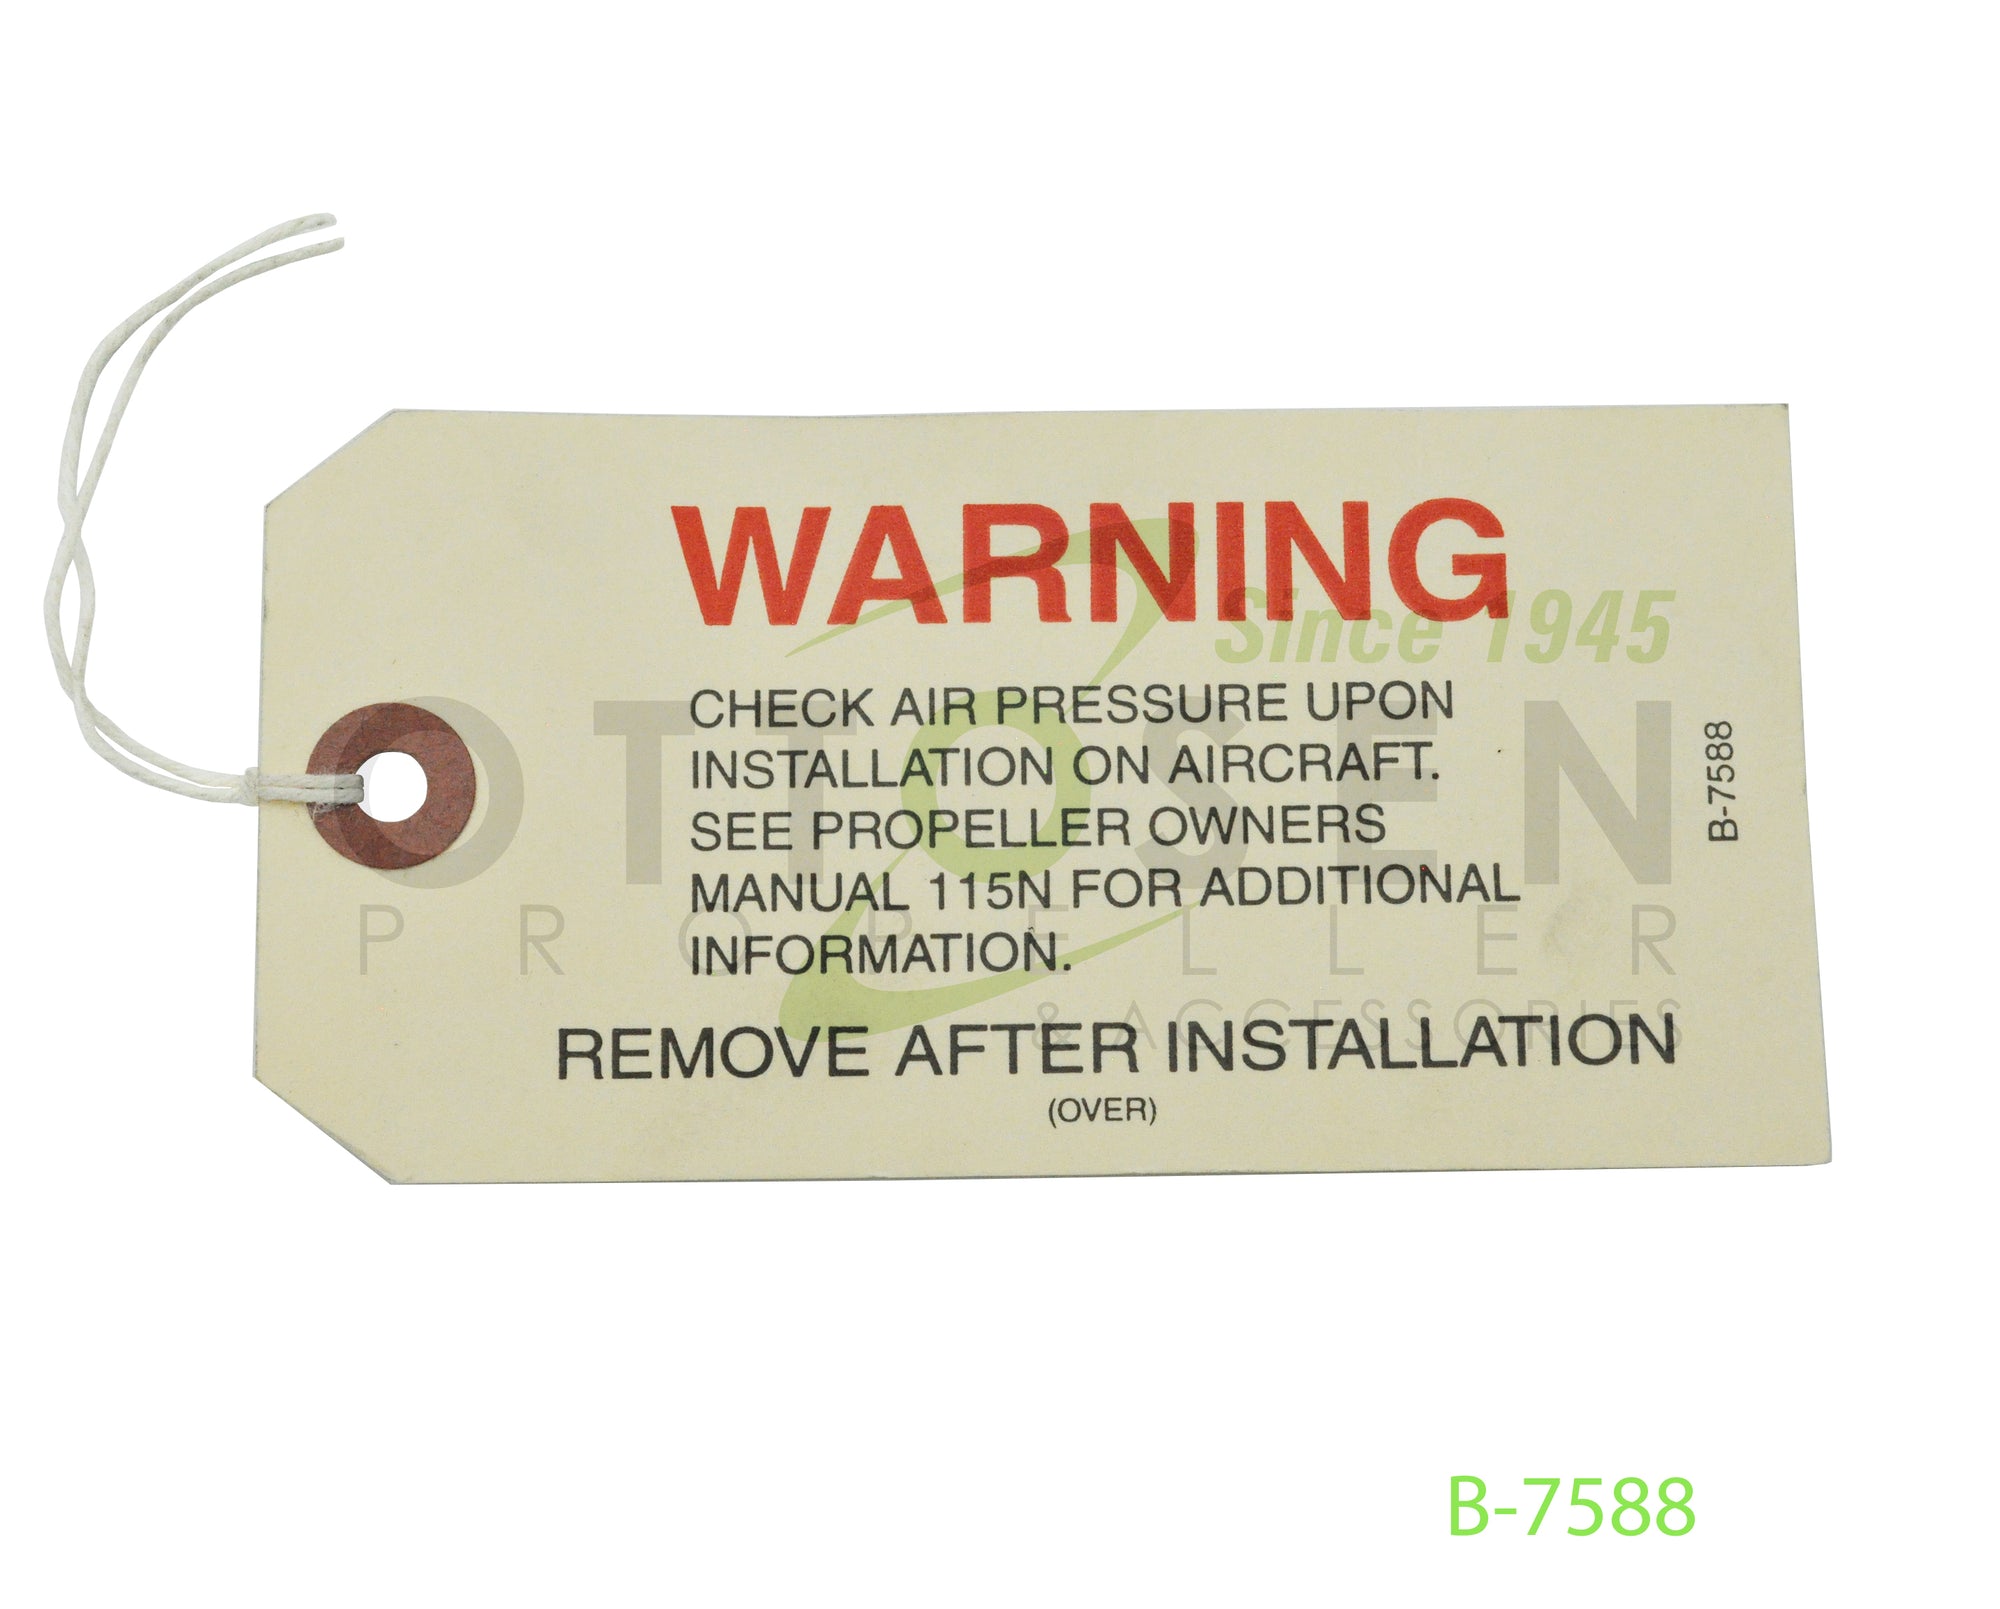 B-7588-HARTZELL-PROPELLER-AIR-PRESSURE-WARNING-TAG-PICTURE-1